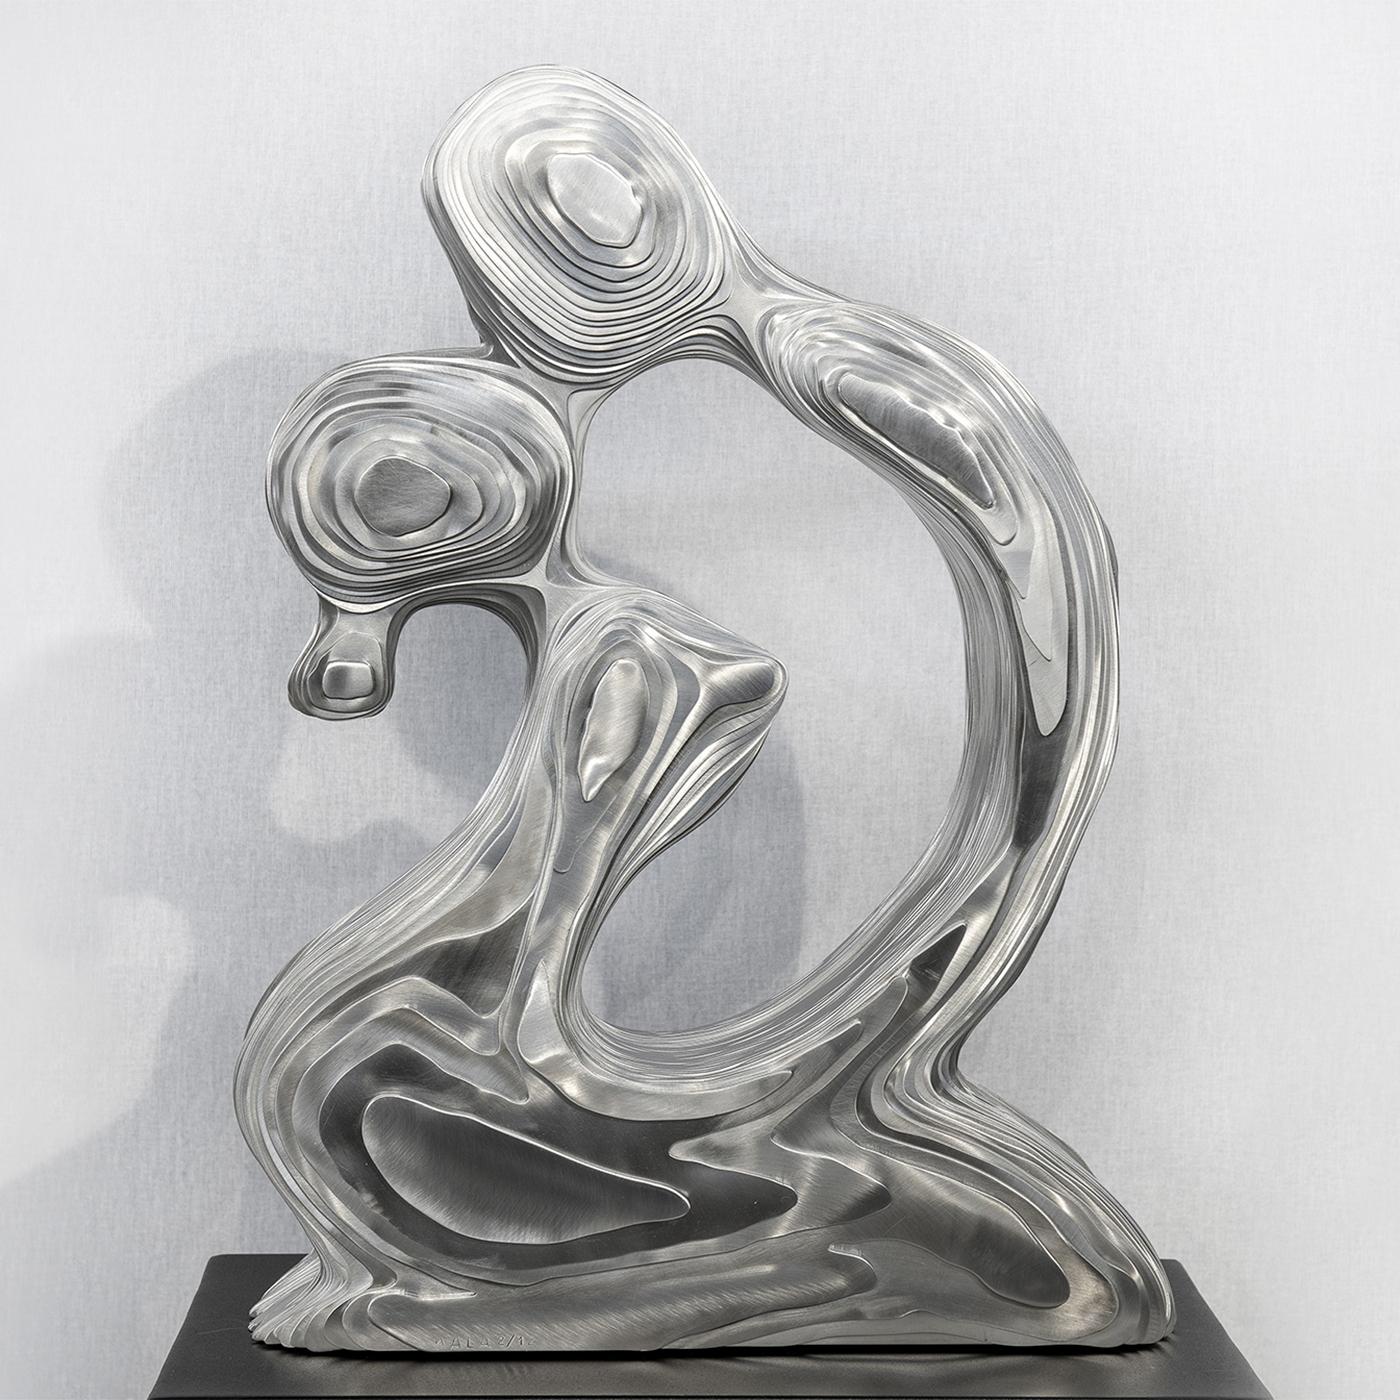 Sculpture The Kiss made with aluminium 
Hand-crafted plates. Edition of 8 pieces made in 
Welded and shaped aluminium into masterful 
Works of contemporary art.